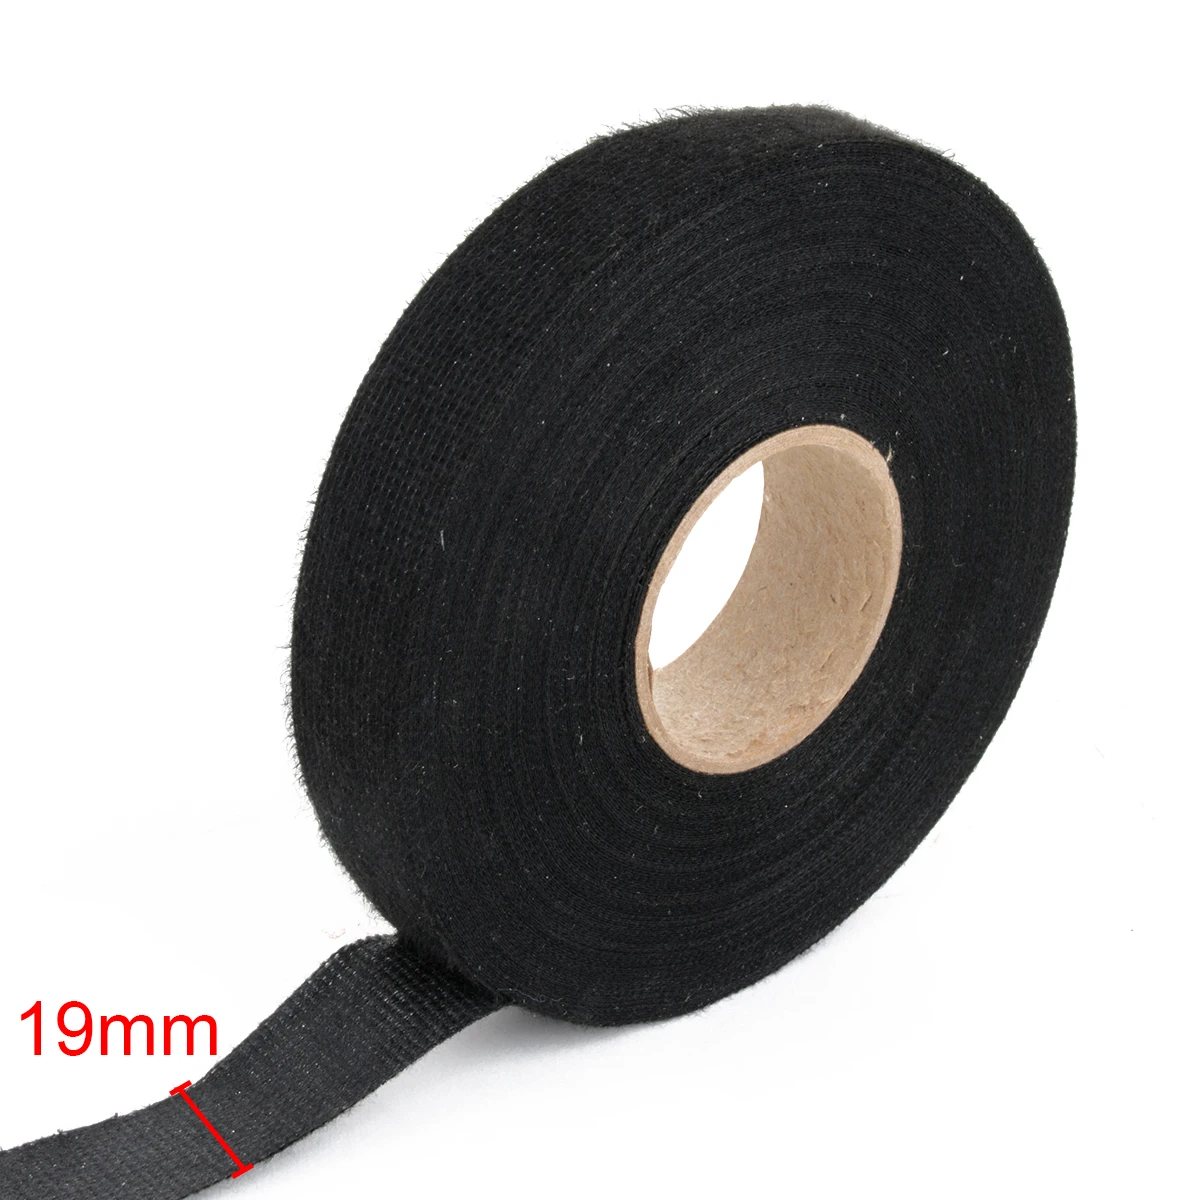 18m x 19mm  Black Adhesive Cloth Fabric Tape Cable Looms Wiring Harness New 